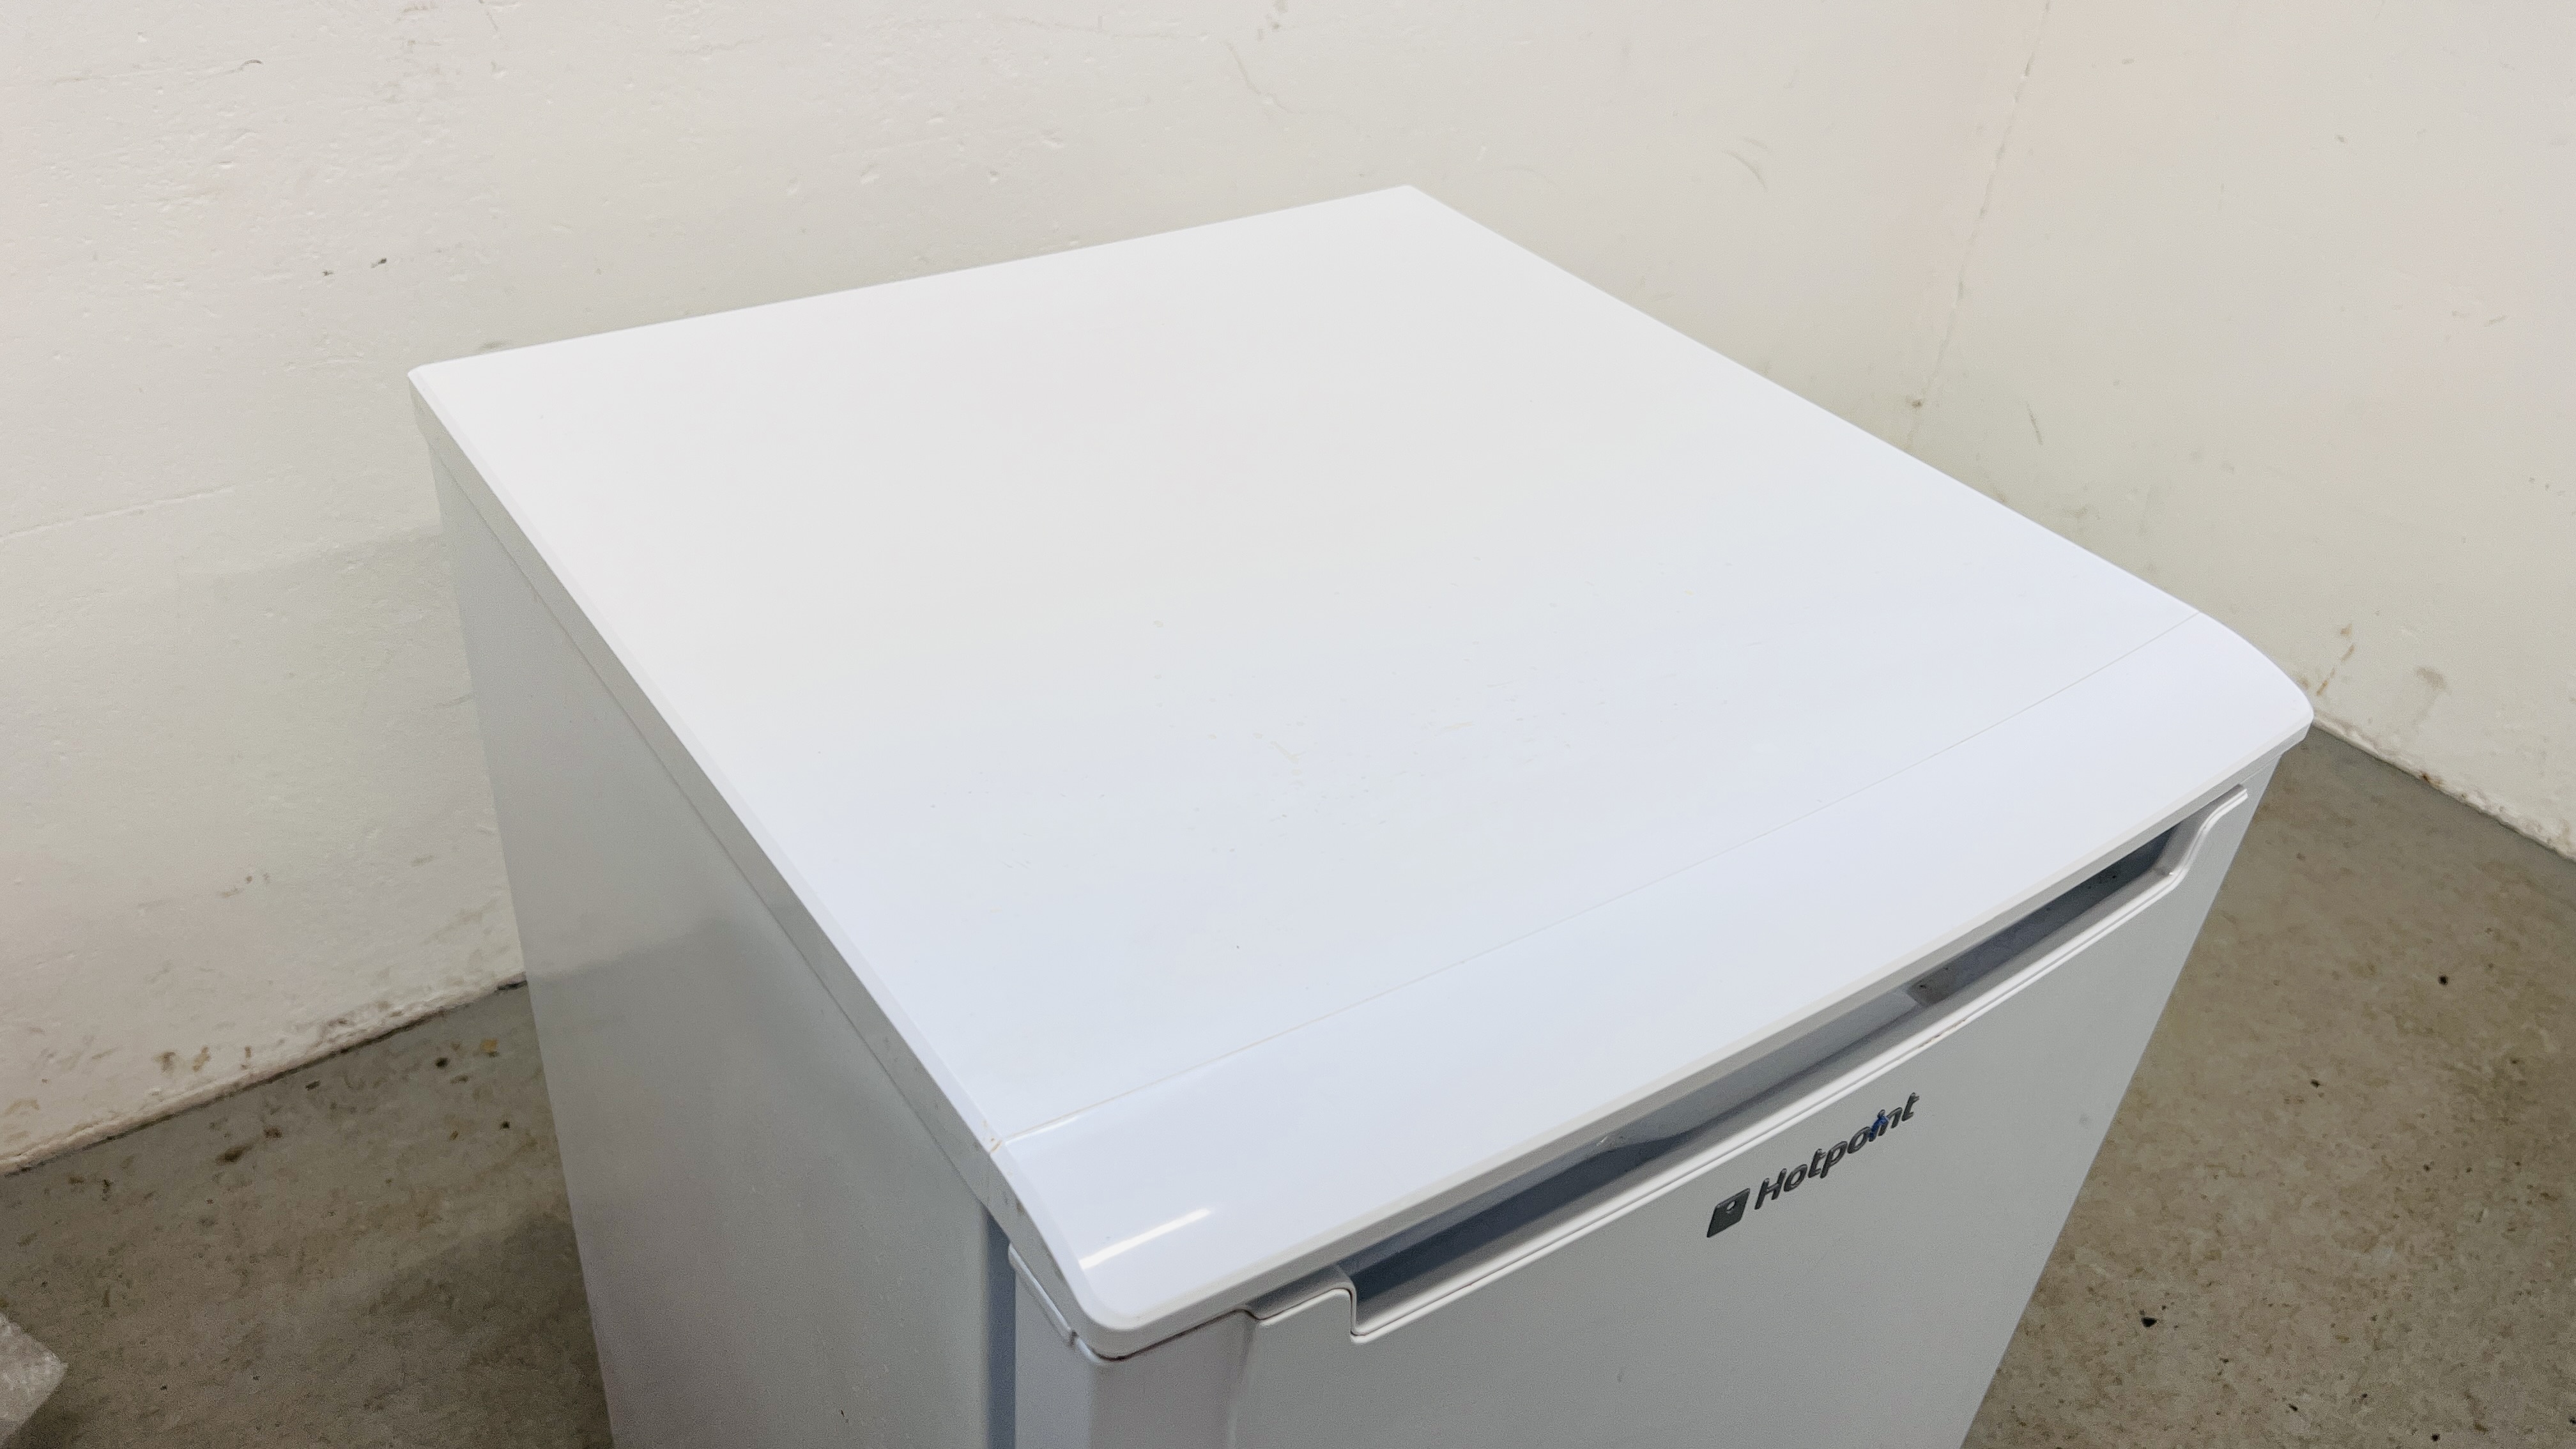 A HOTPOINT UNDER COUNTER FREEZER - SOLD AS SEEN. - Image 7 of 8